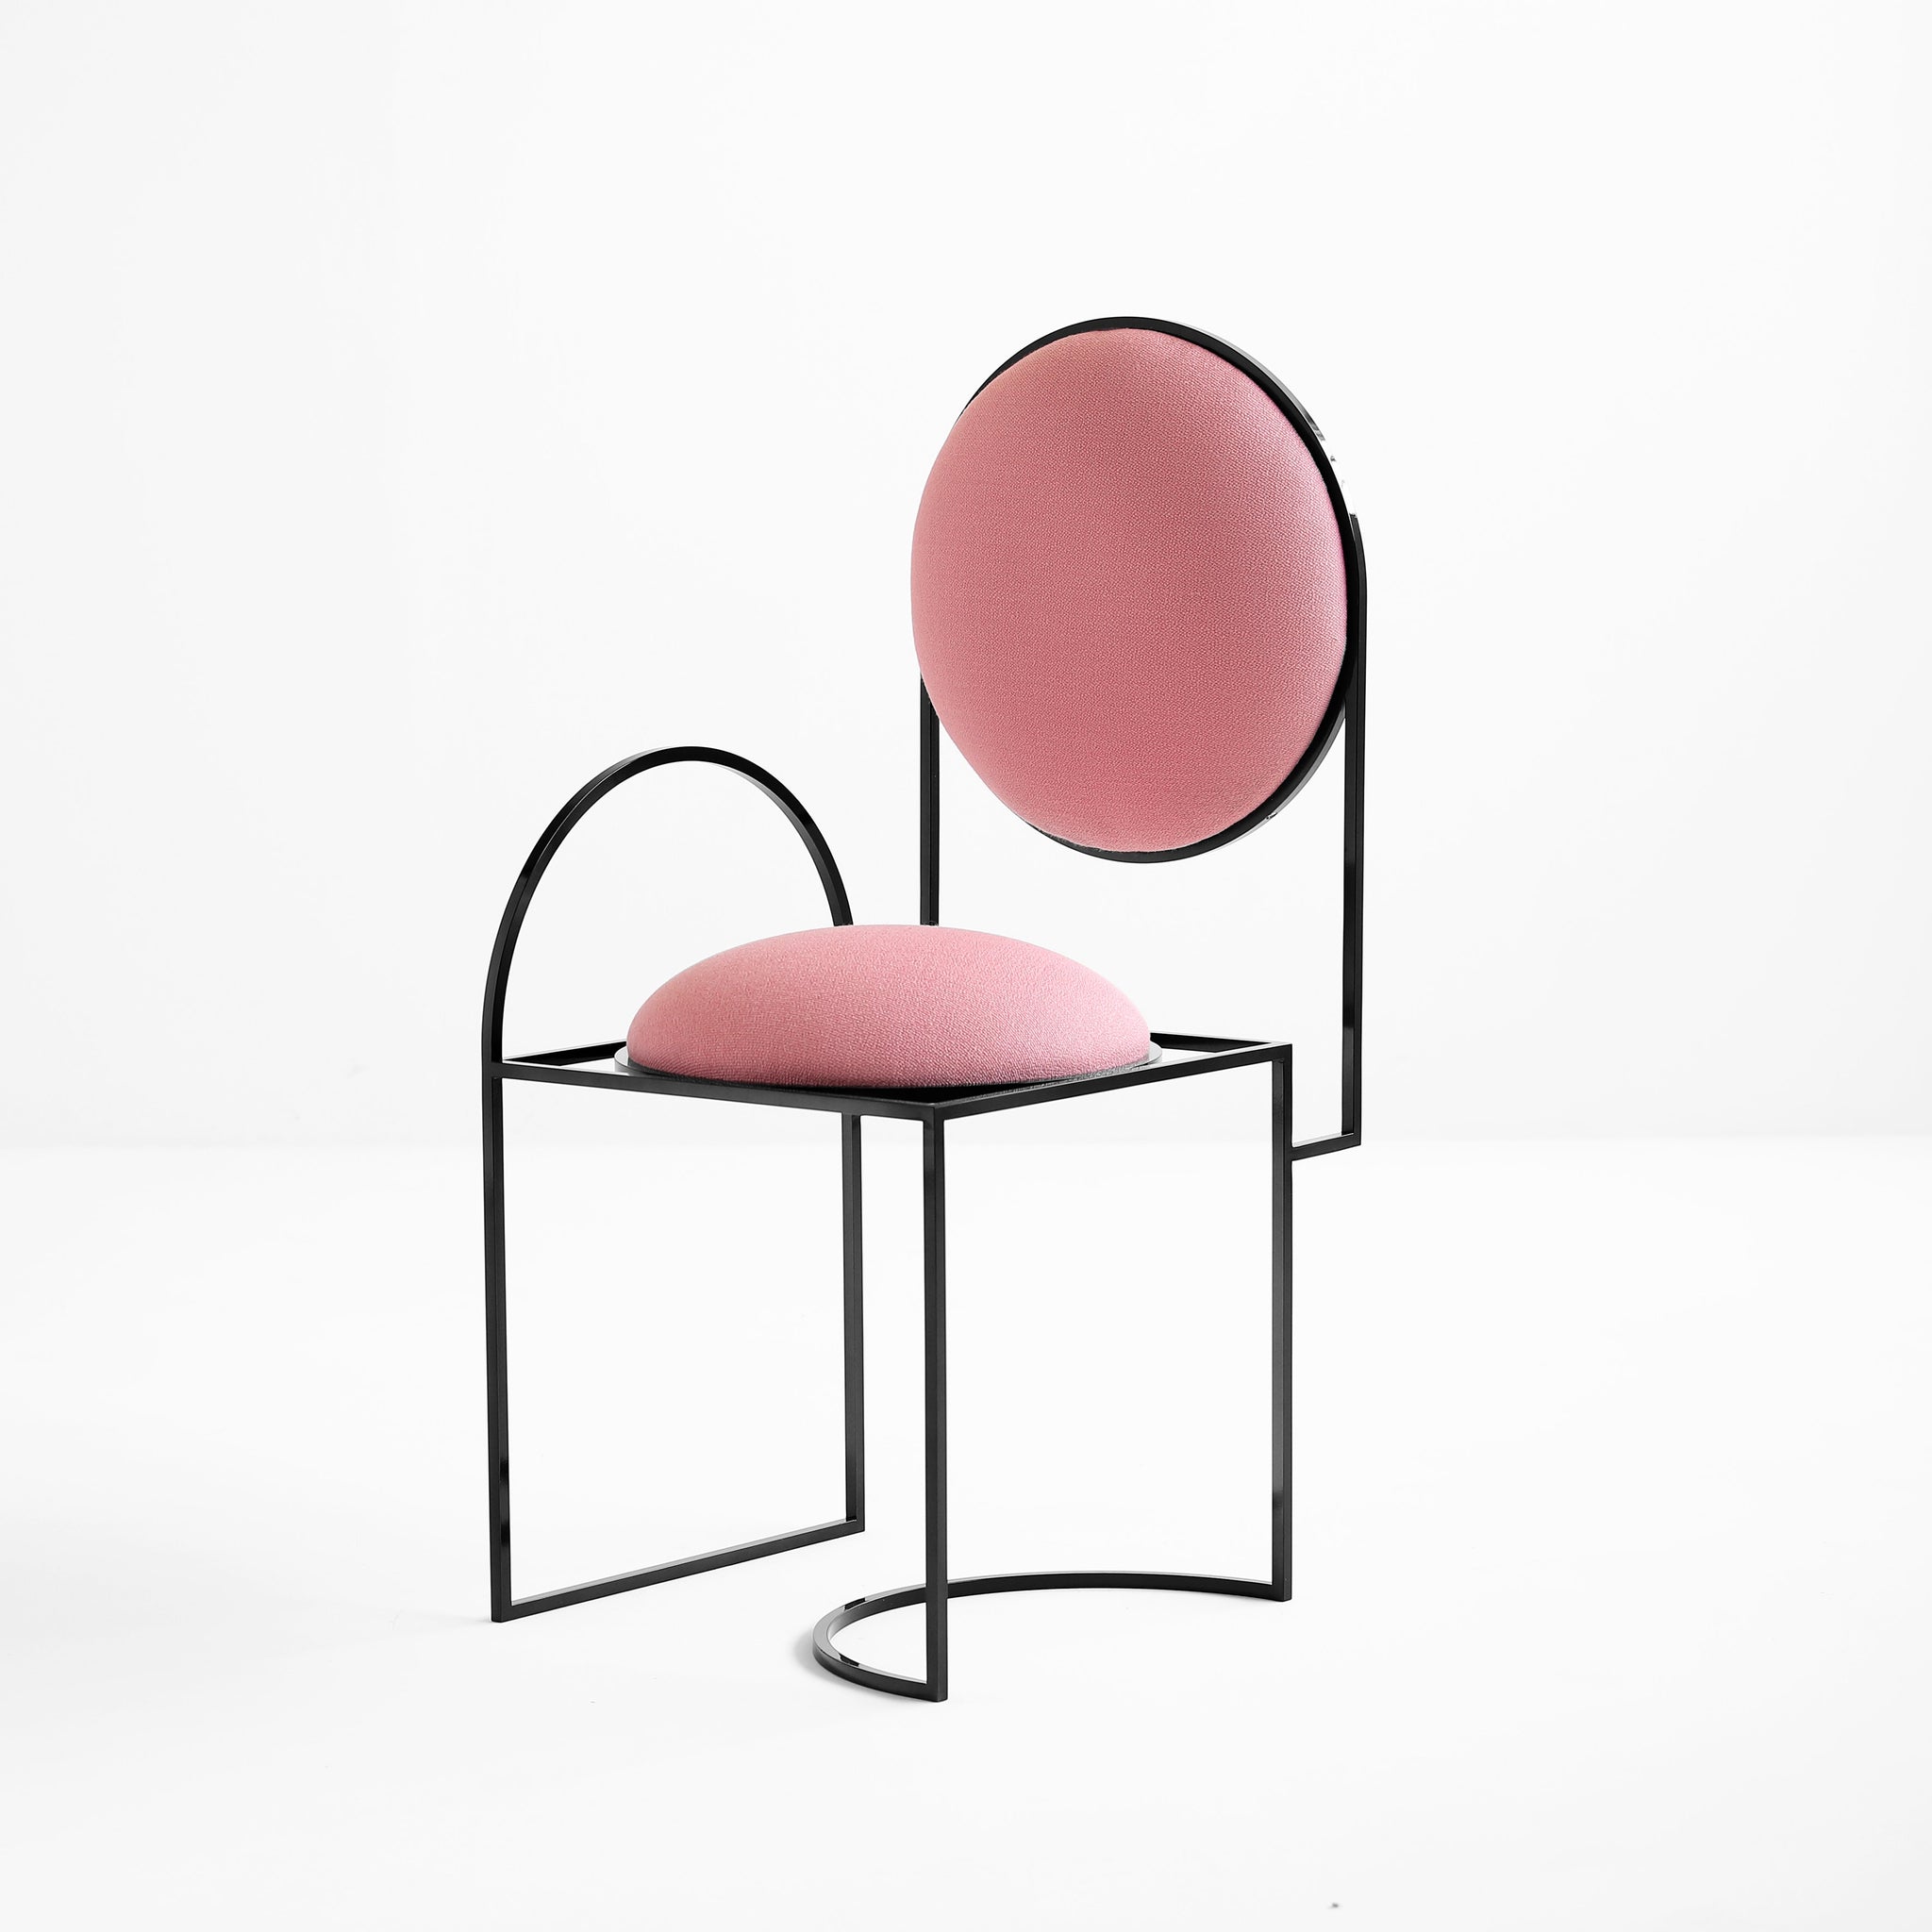 SOLAR CHAIR <br>PINK